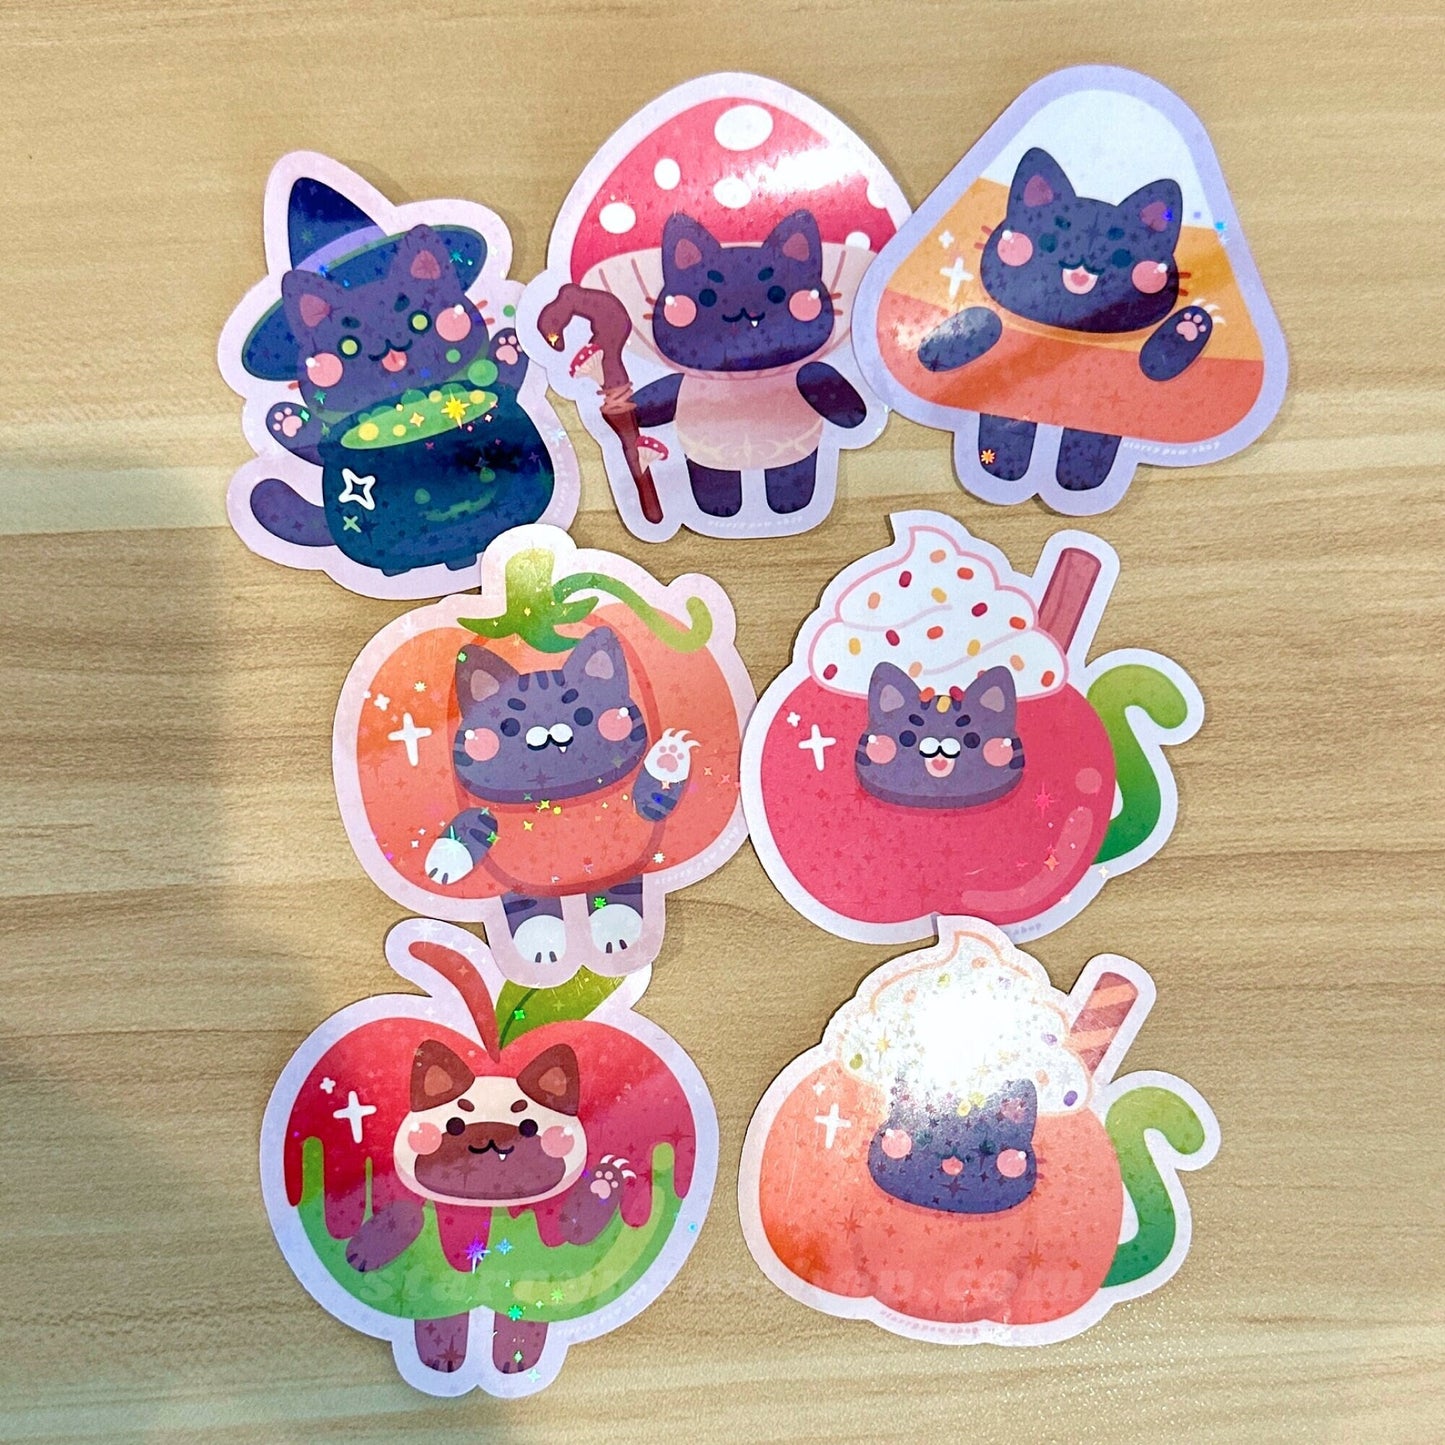 Ghost Cat Magnets / Stickers | 8 Cat Colors | Star Holo Waterproof Die Cut - Whiteboard Magnet or Ghostie Cat Sticker